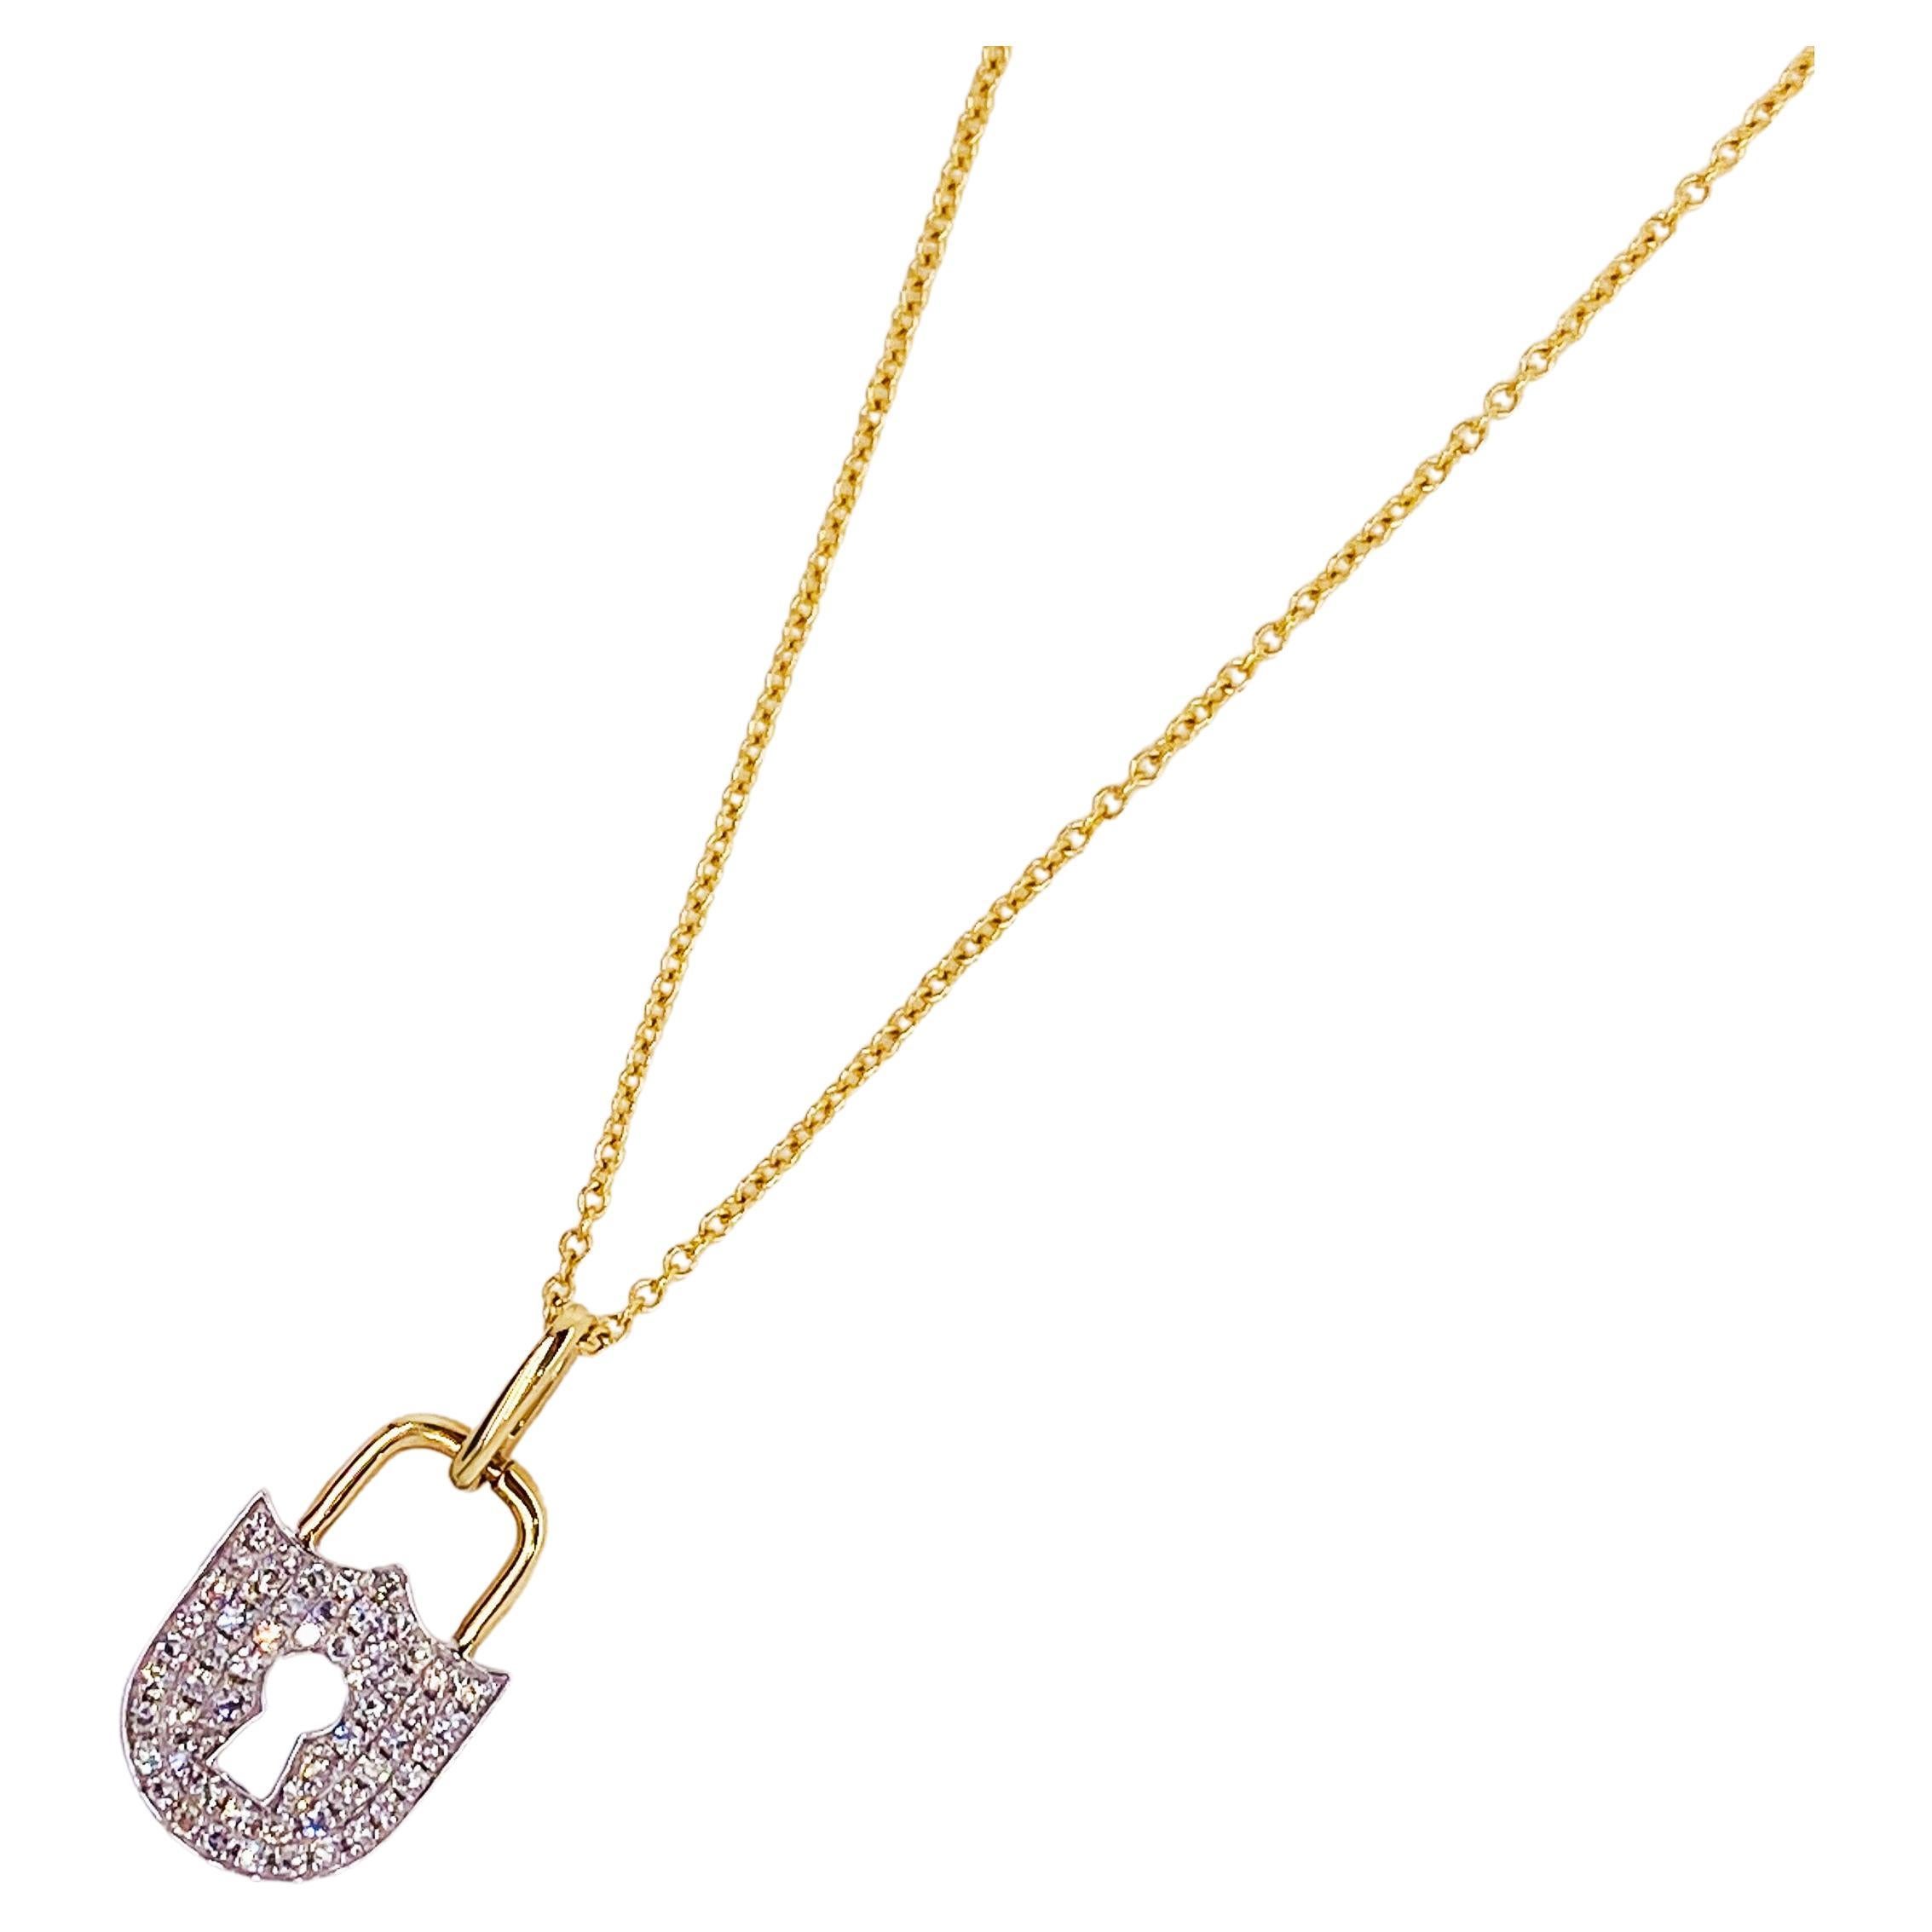 Your love is locked in this diamond lock necklace. The 57 diamonds are pave set on the 14 karat yellow gold lock pendant and has an 18 inch cable chain also constructed of solid 14 karat yellow gold. The love lock is a tradition where a couple seal